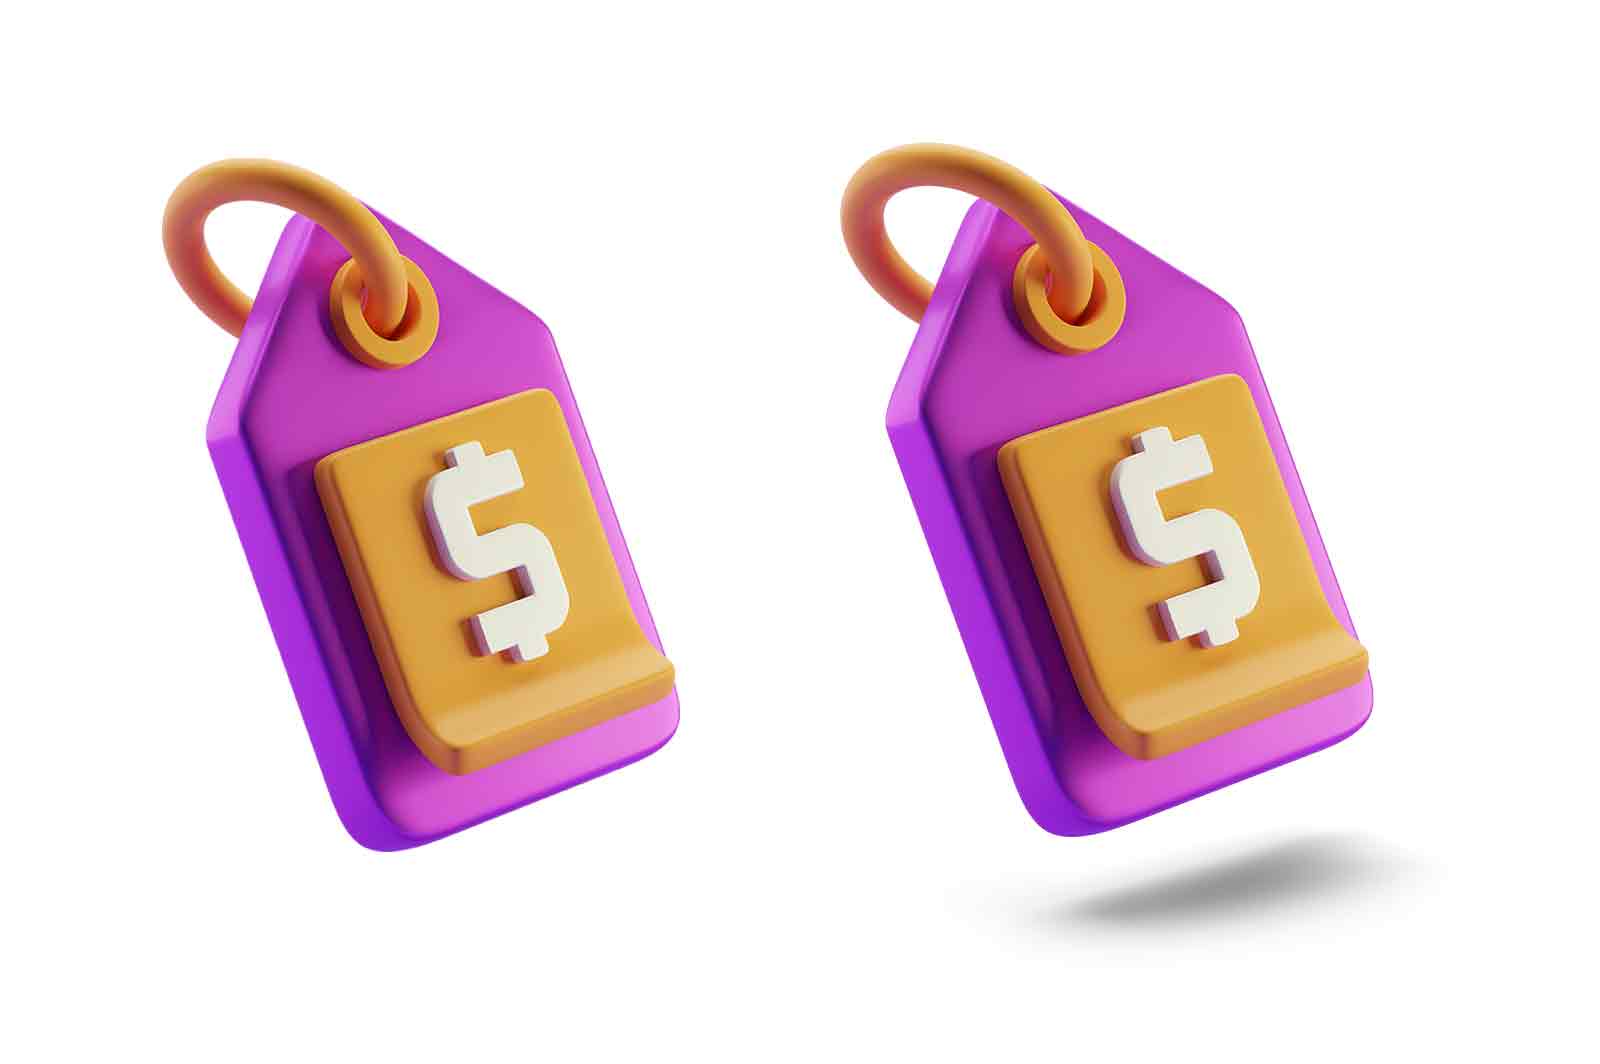 Price tag 3d rendered icon illustration. Label on item for sale. Promotion marketing or special offer concept